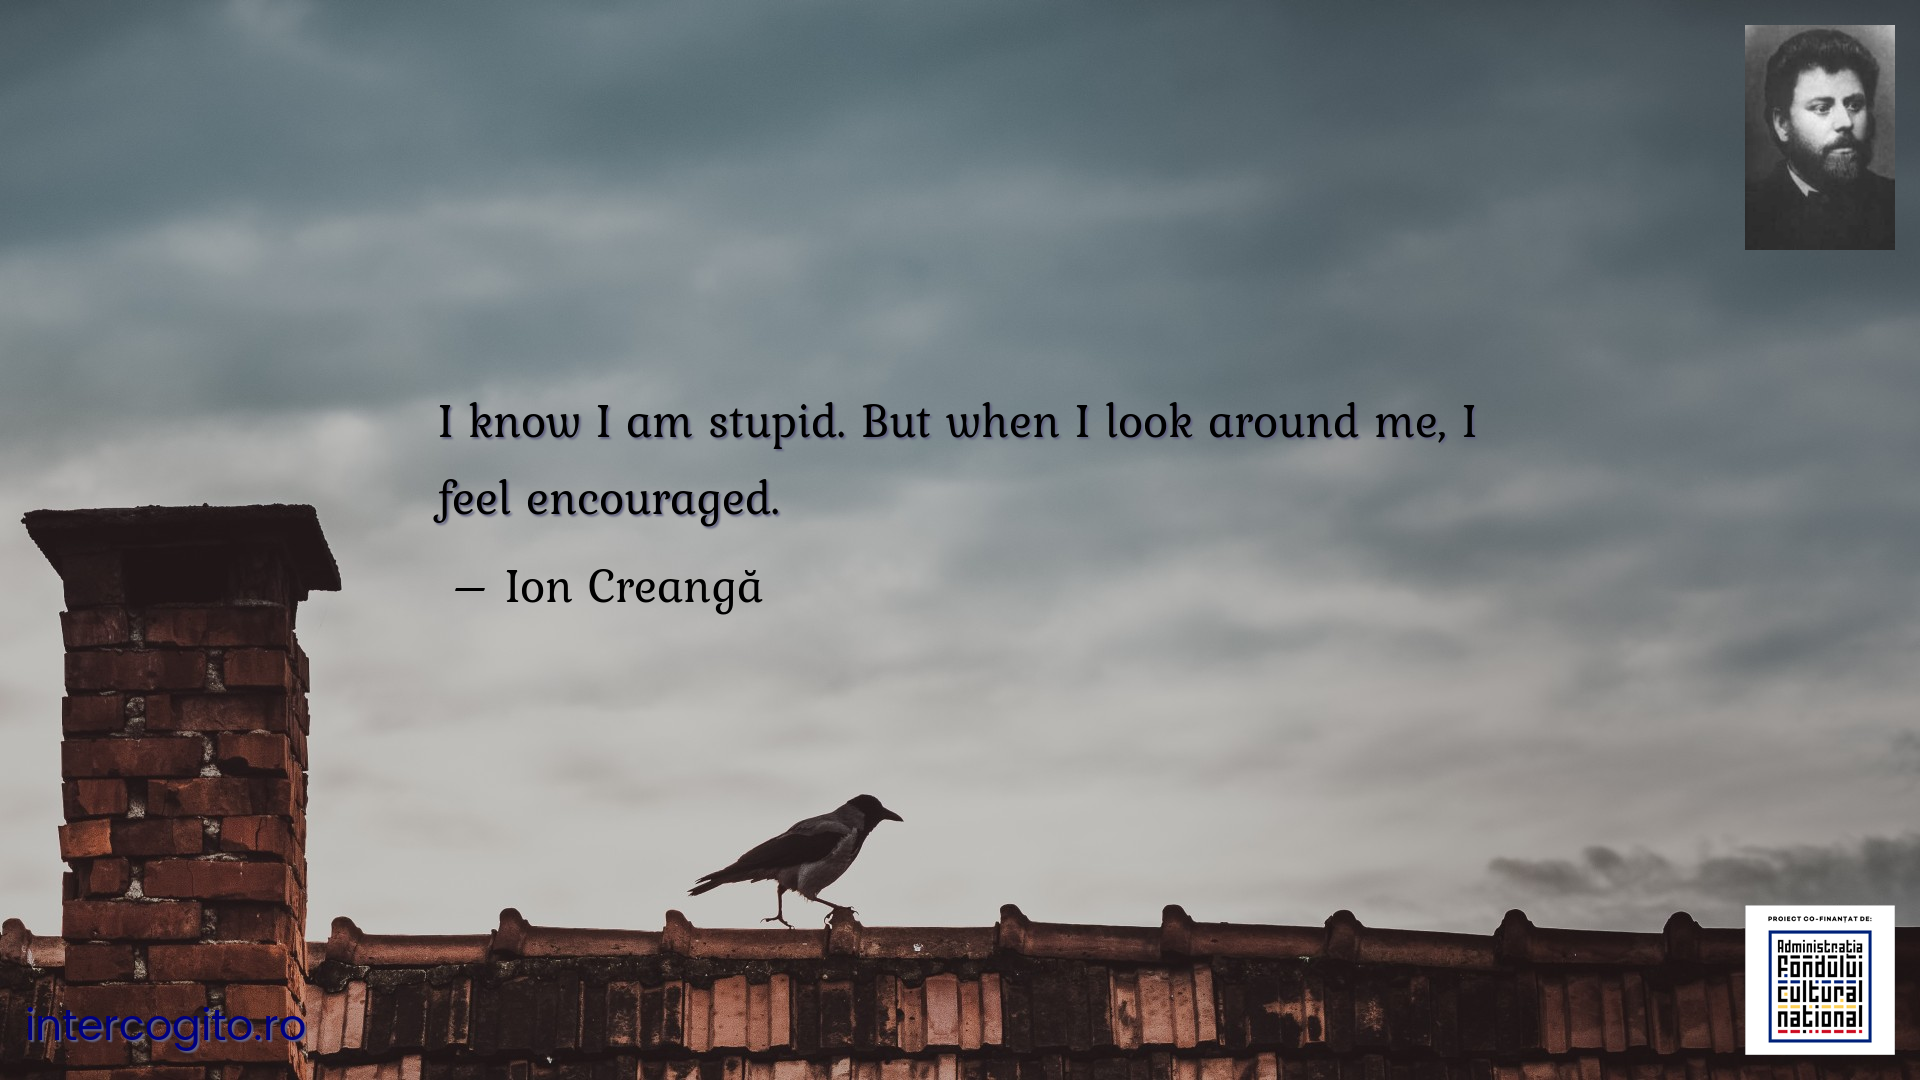 I know I am stupid. But when I look around me, I feel encouraged.